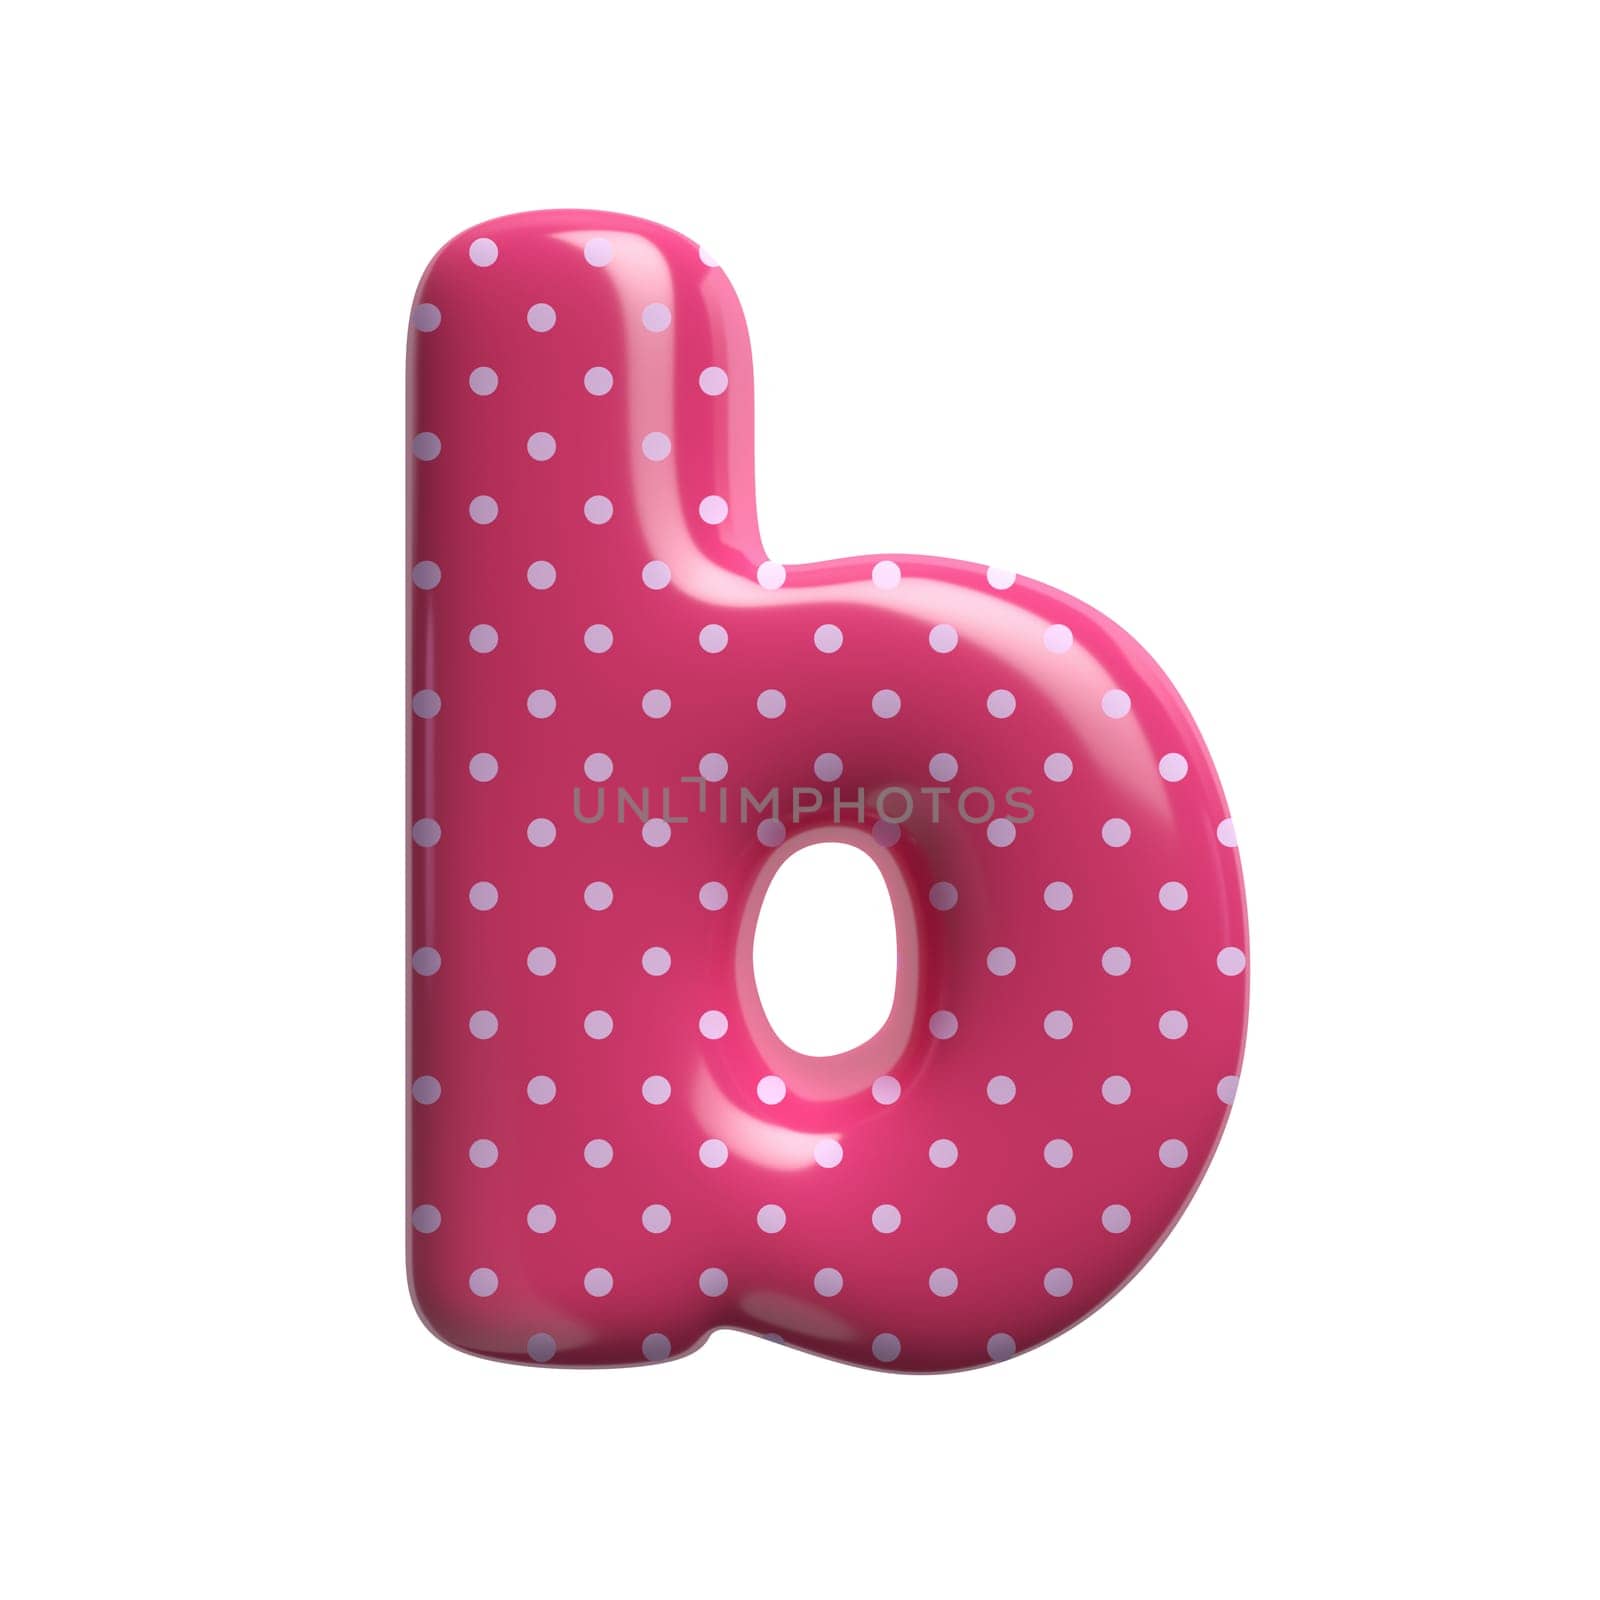 Polka dot letter B - Lower-case 3d pink retro font - Suitable for Fashion, retro design or decoration related subjects by chrisroll